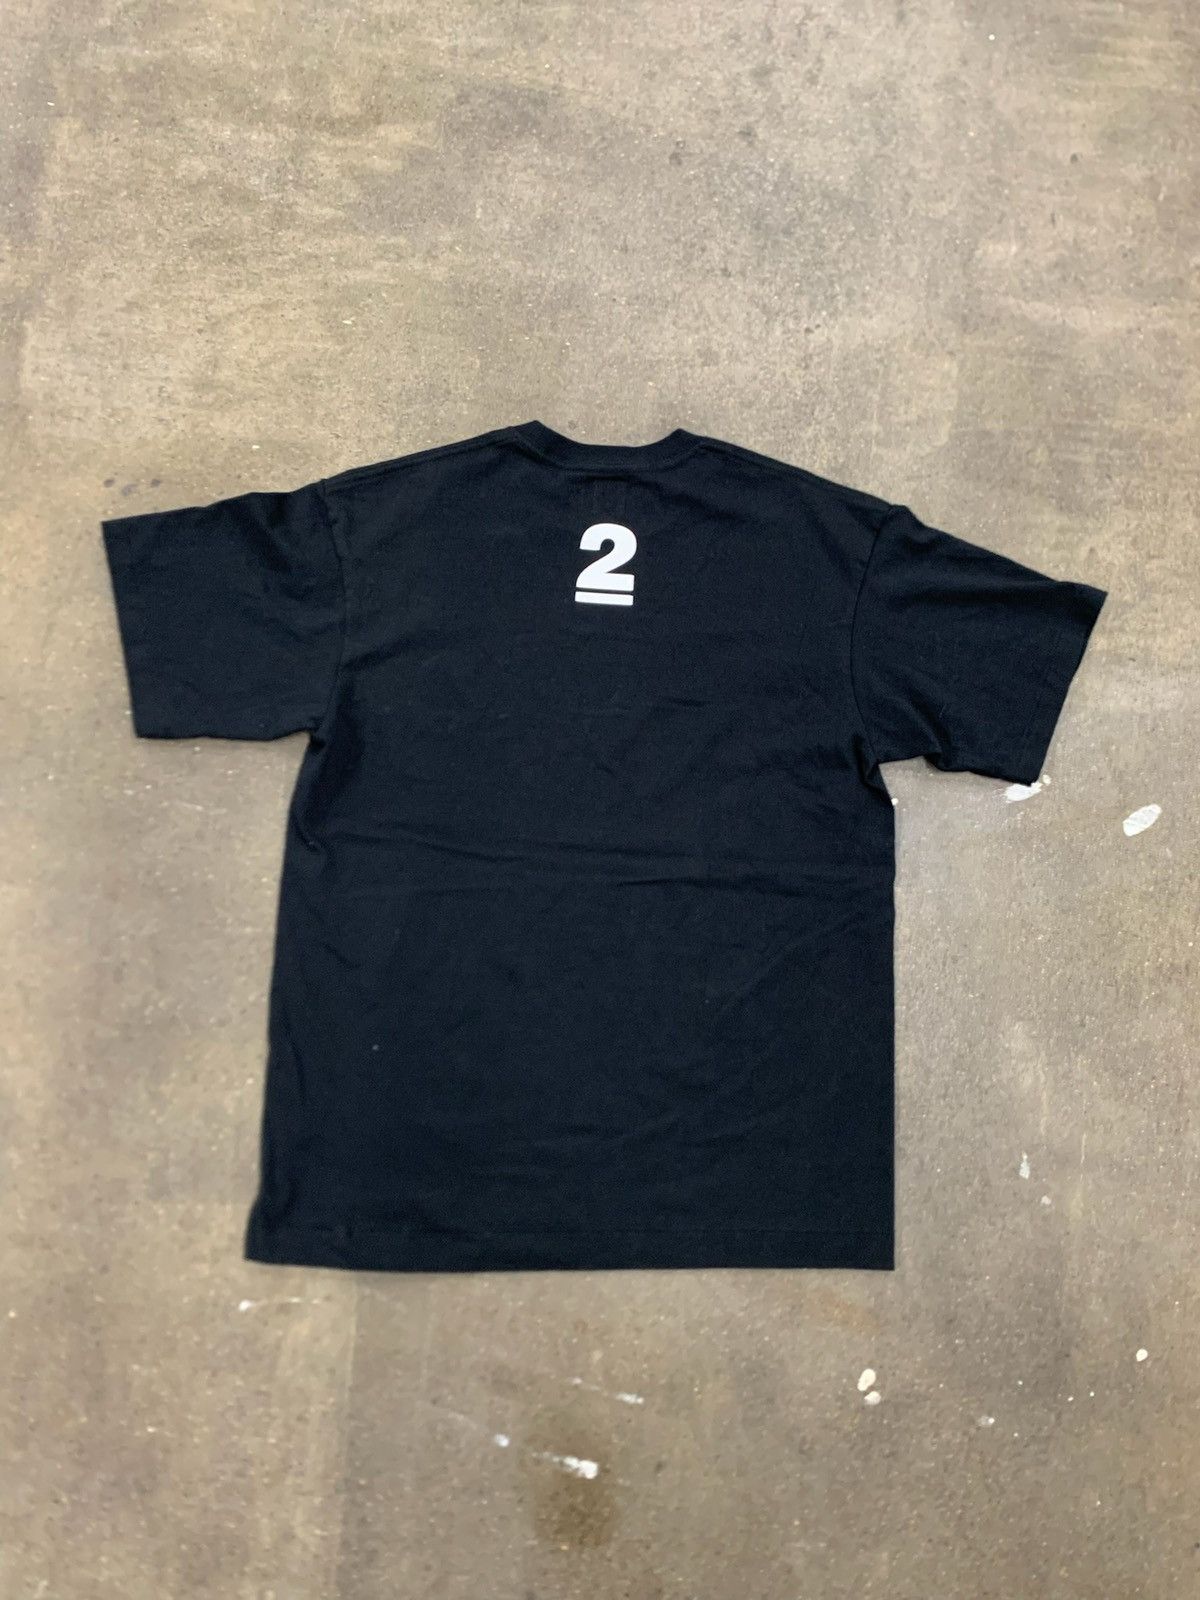 Undercover Undercover x Human Made Last Orgy 2 T-Shirt | Grailed